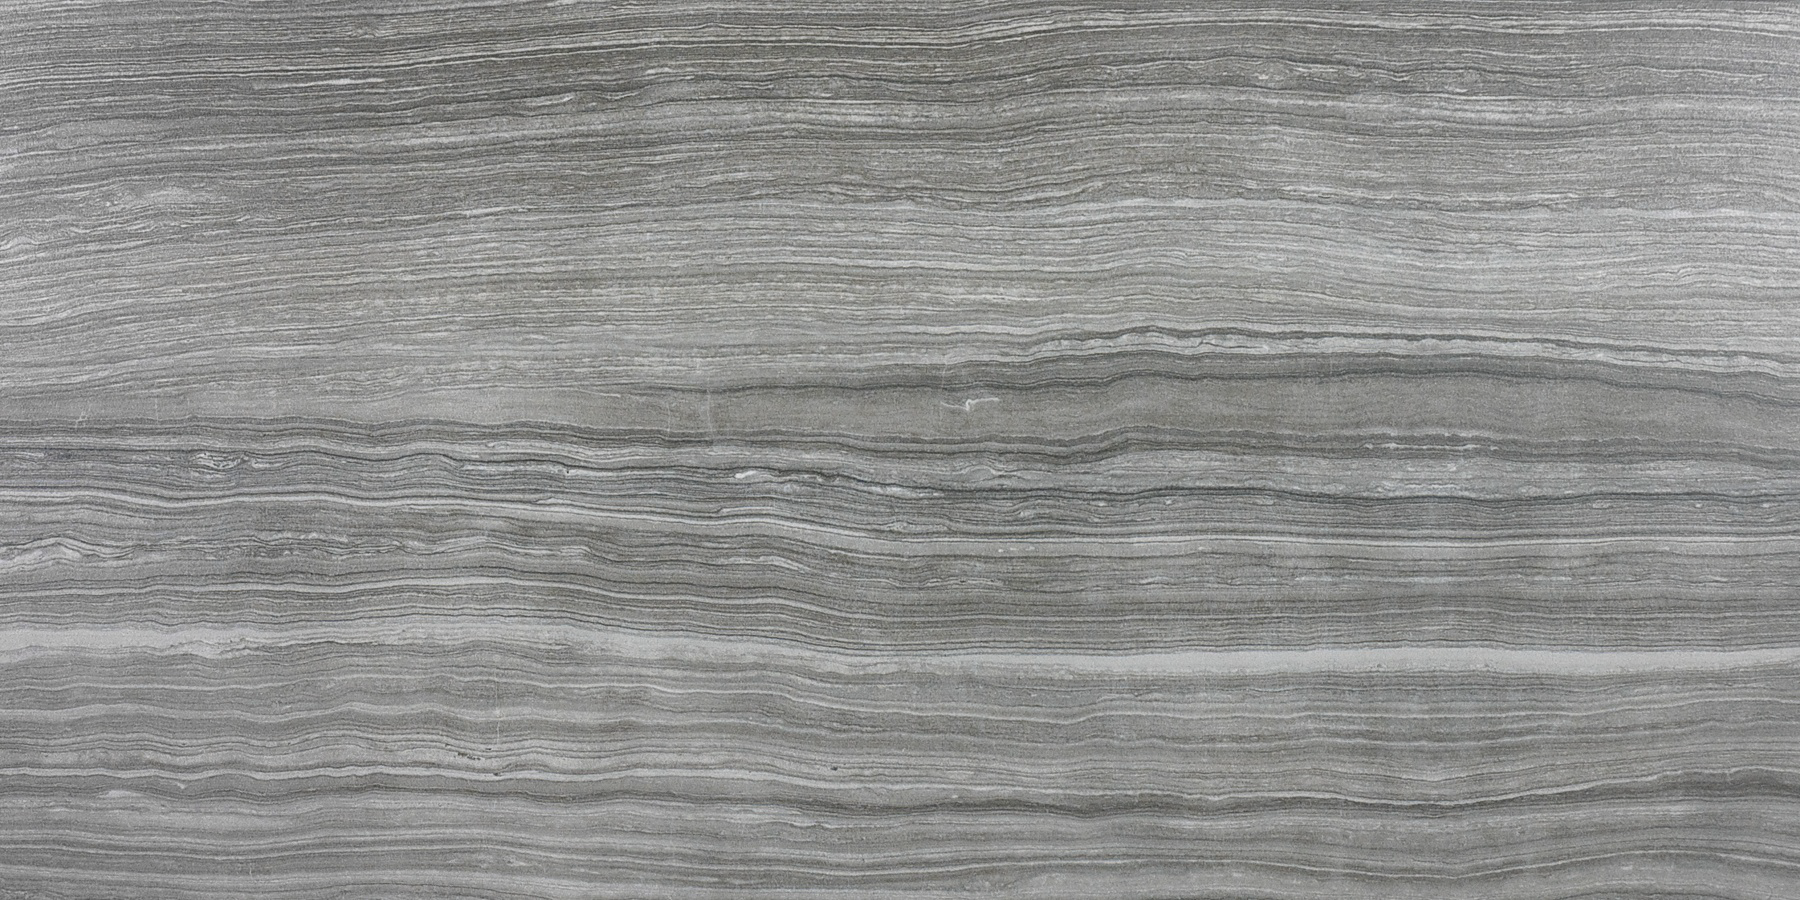 carbon pattern glazed porcelain field tile from eramosa anatolia collection distributed by surface group international matte finish pressed edge 12x24 rectangle shape